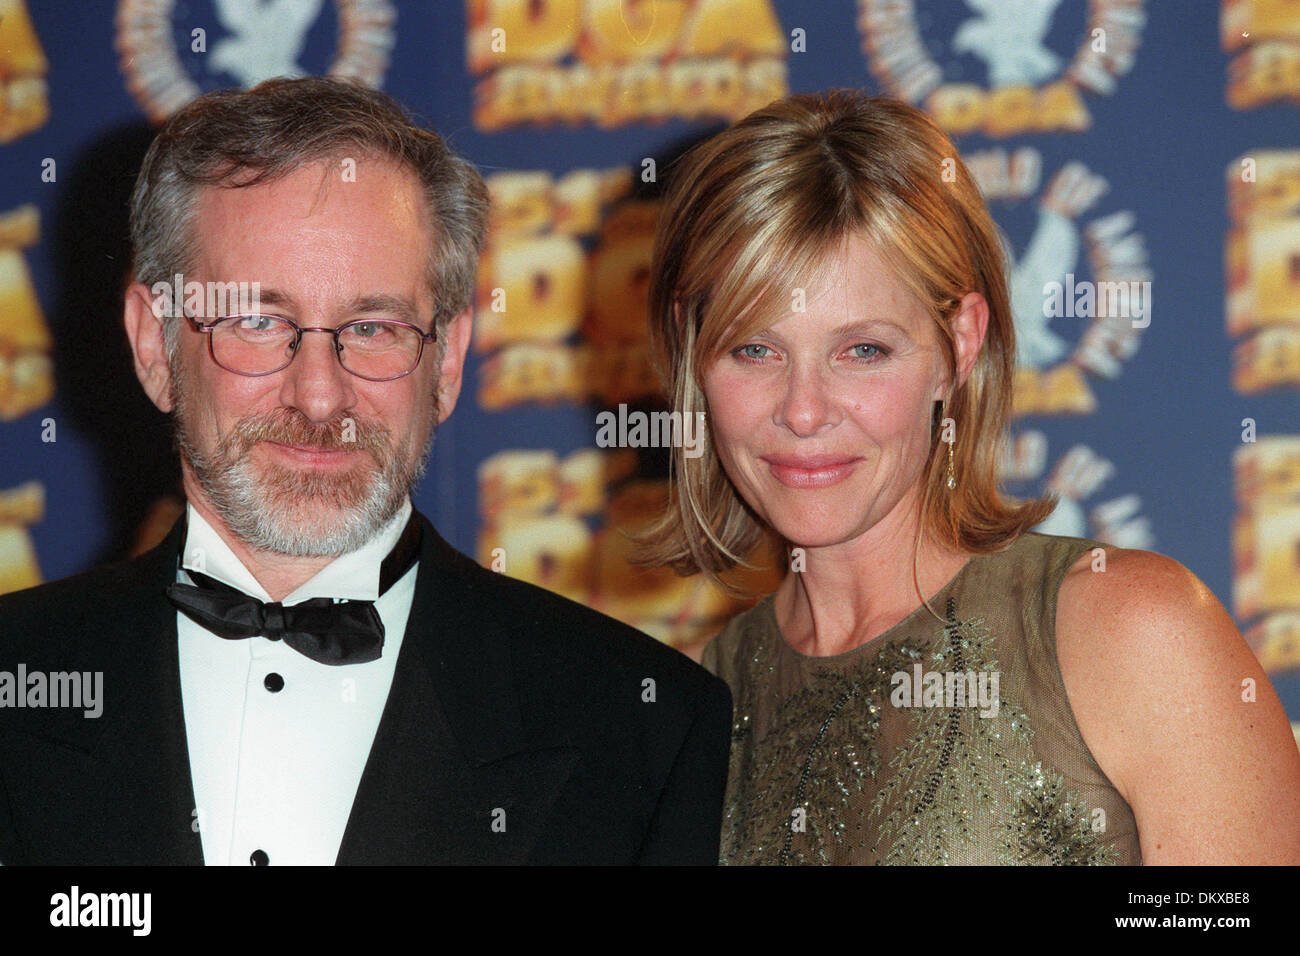 STEVEN SPIELBERG, KATE CAPSHAW.DIRECTOR & ACTRESS, MARRIED.28/03/1999.R14C2AC. Stock Photo